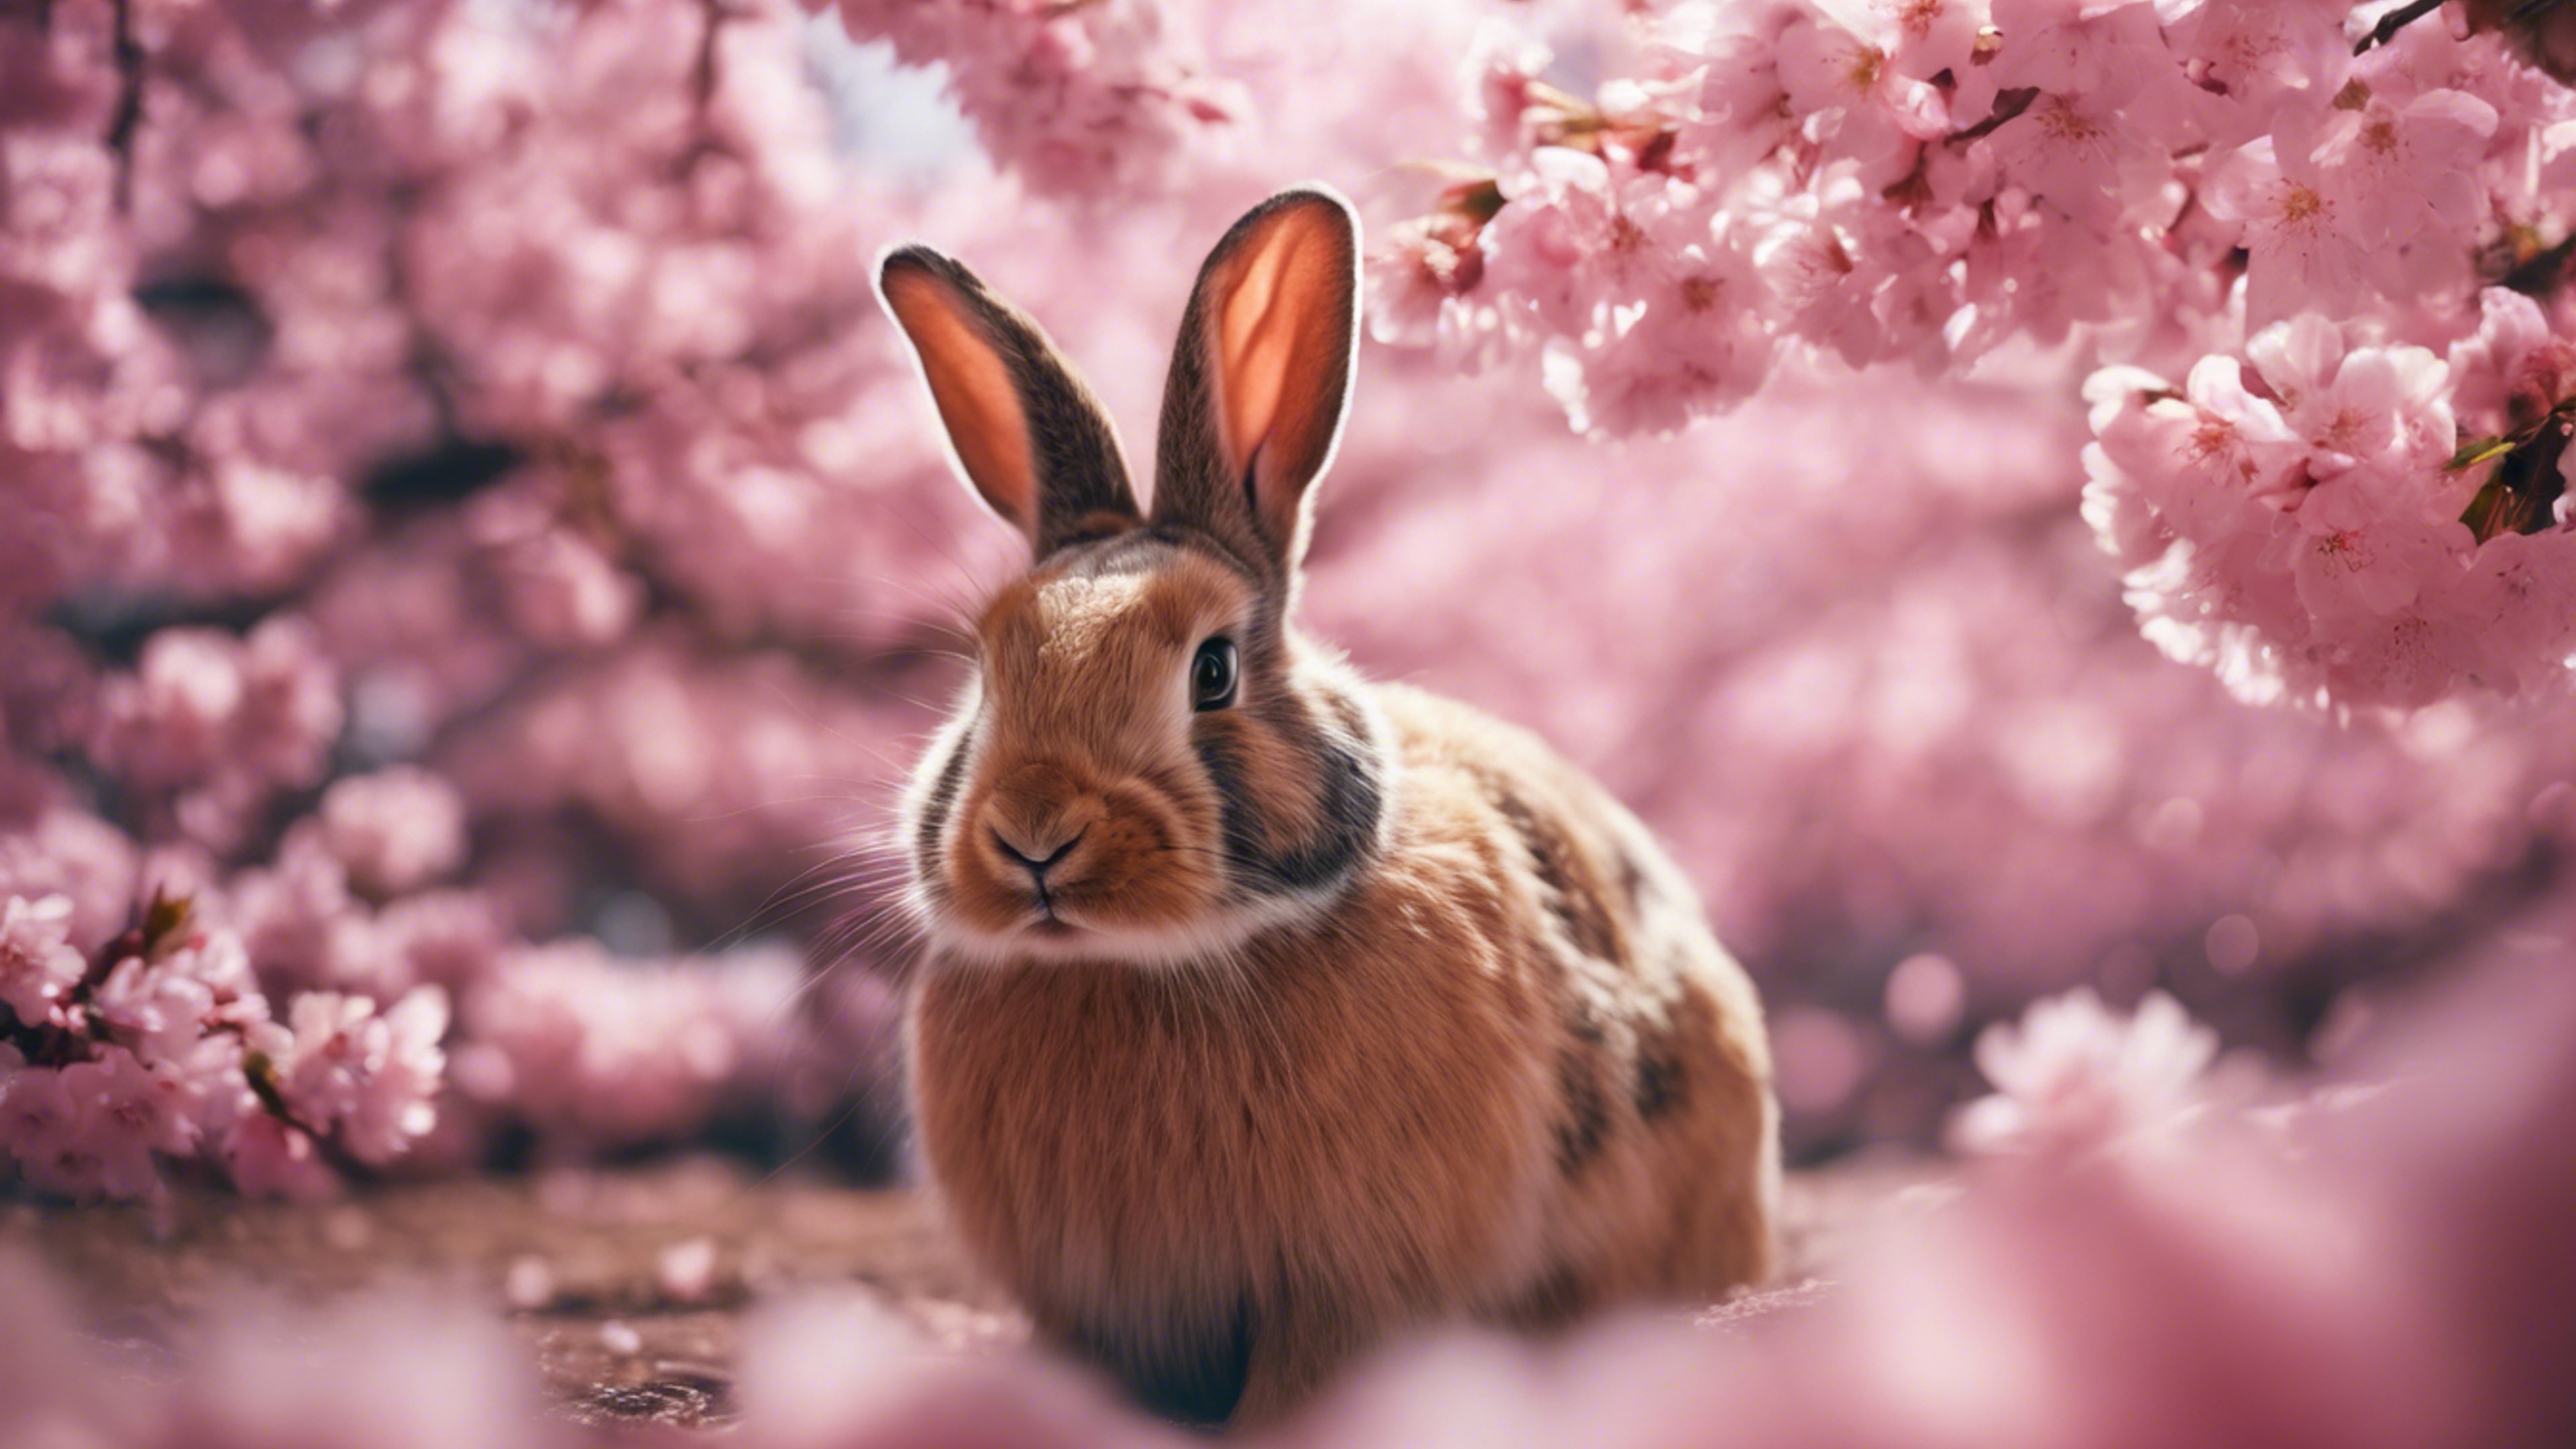 A rabbit amid a cherry blossom festival, surrounded by vibrant pink petals.壁紙[82443ce6430044309a8d]